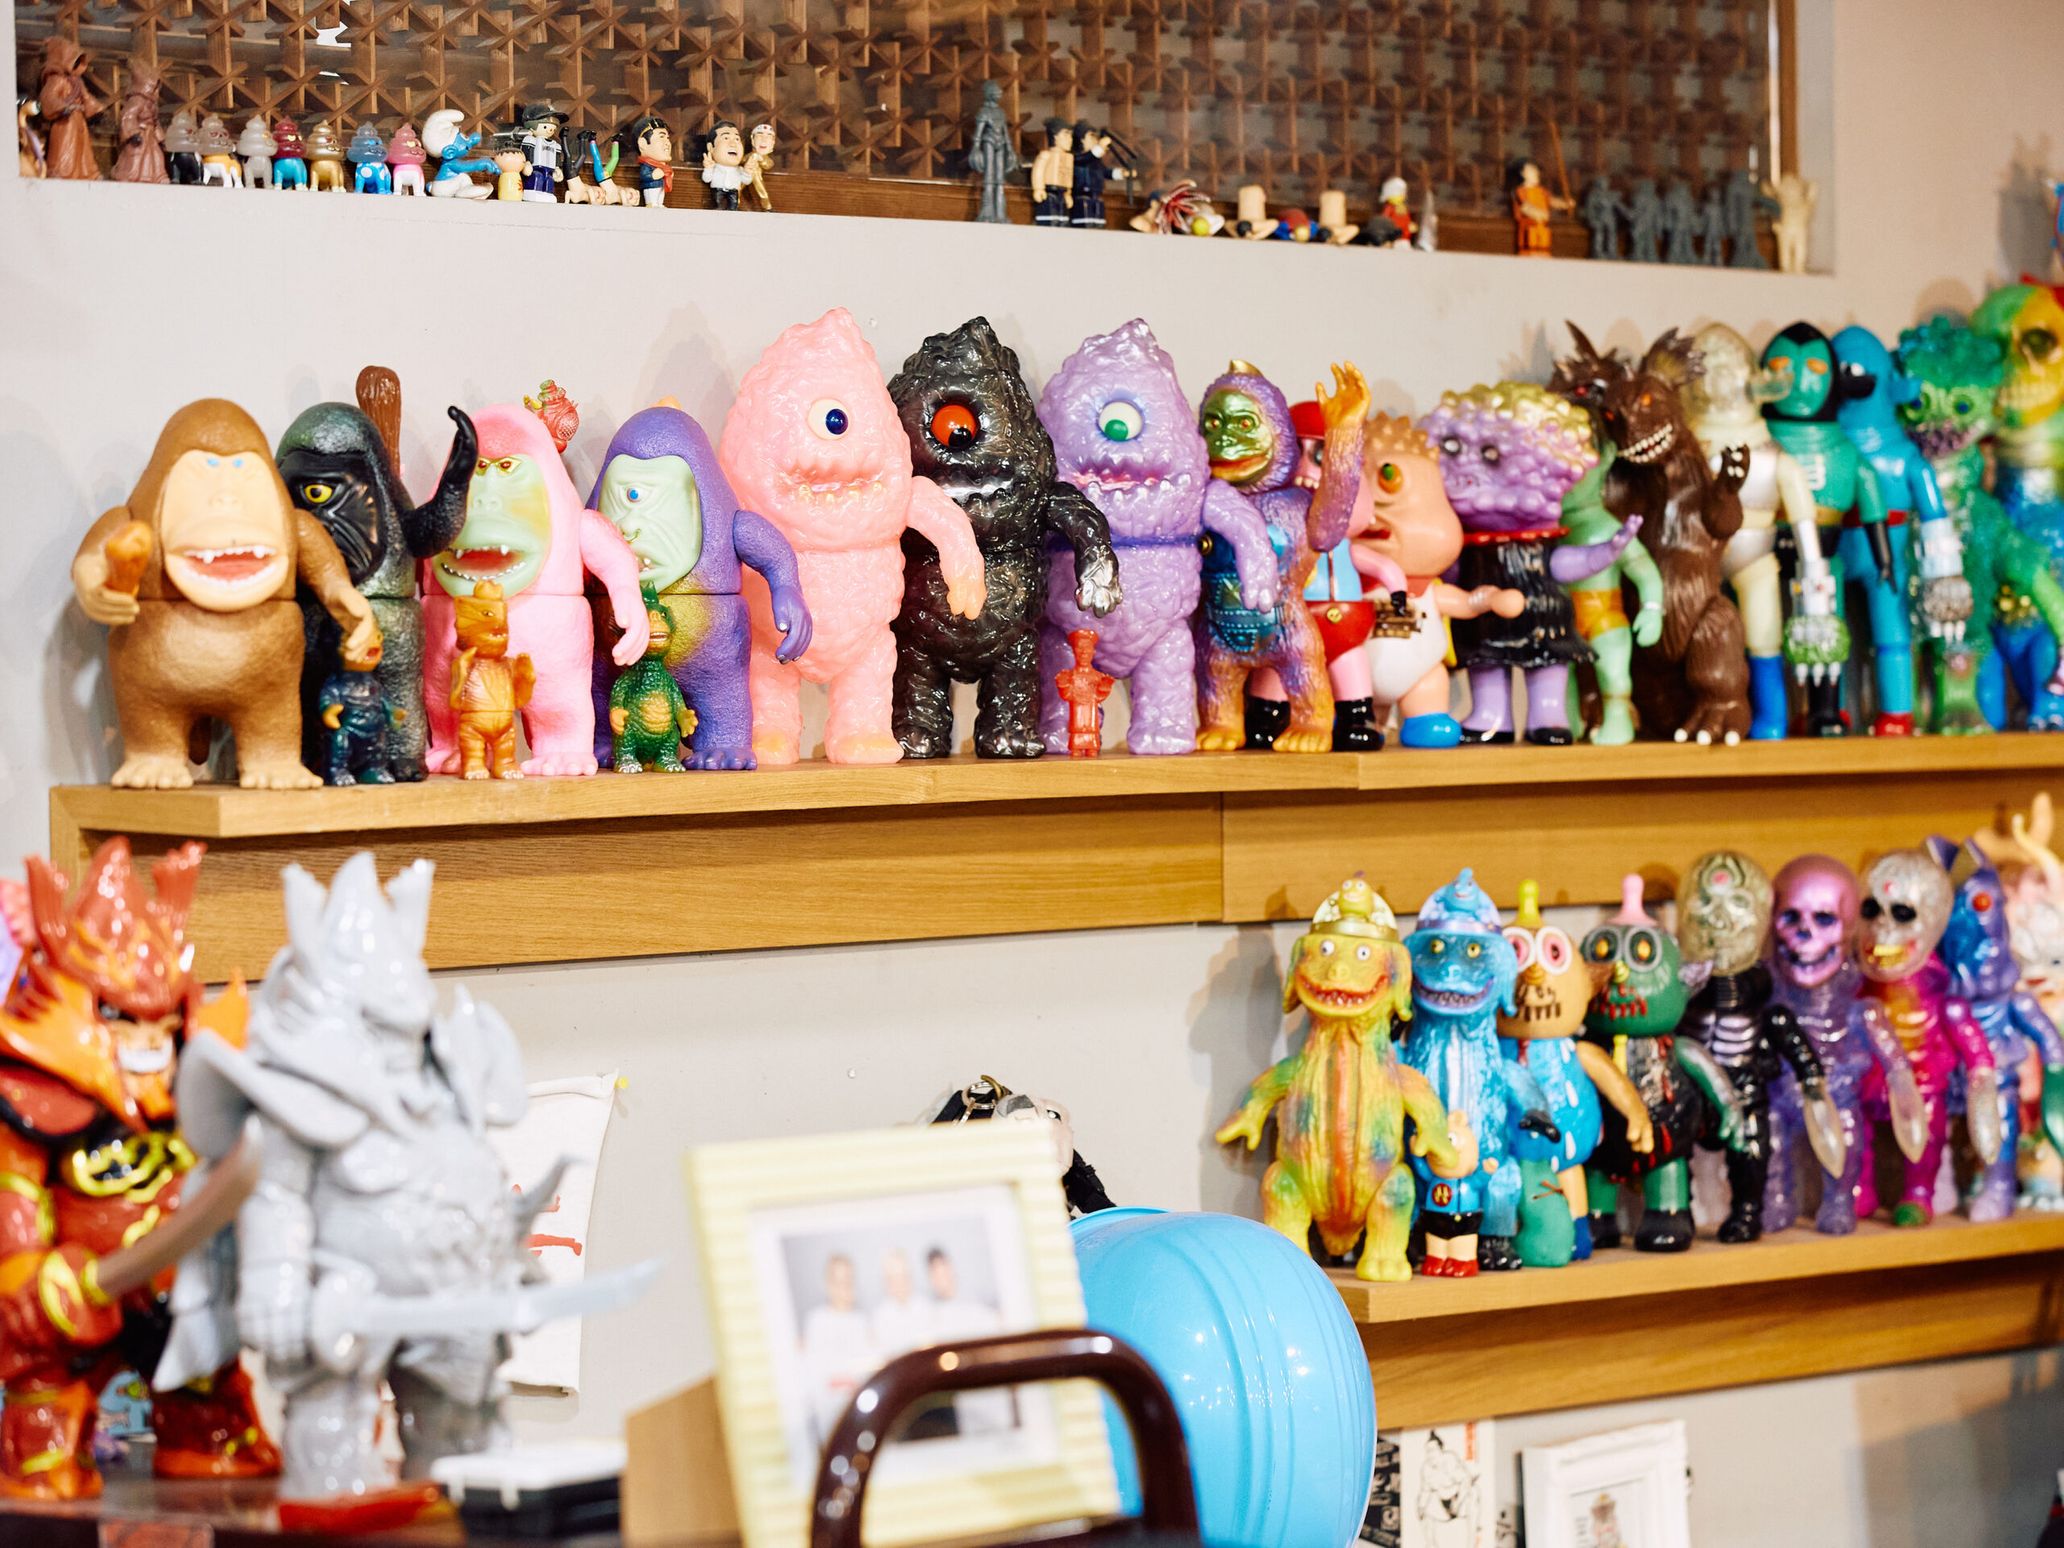 At Oyakata’s office, a massive collection of sofubi toys is lined up on the shelves